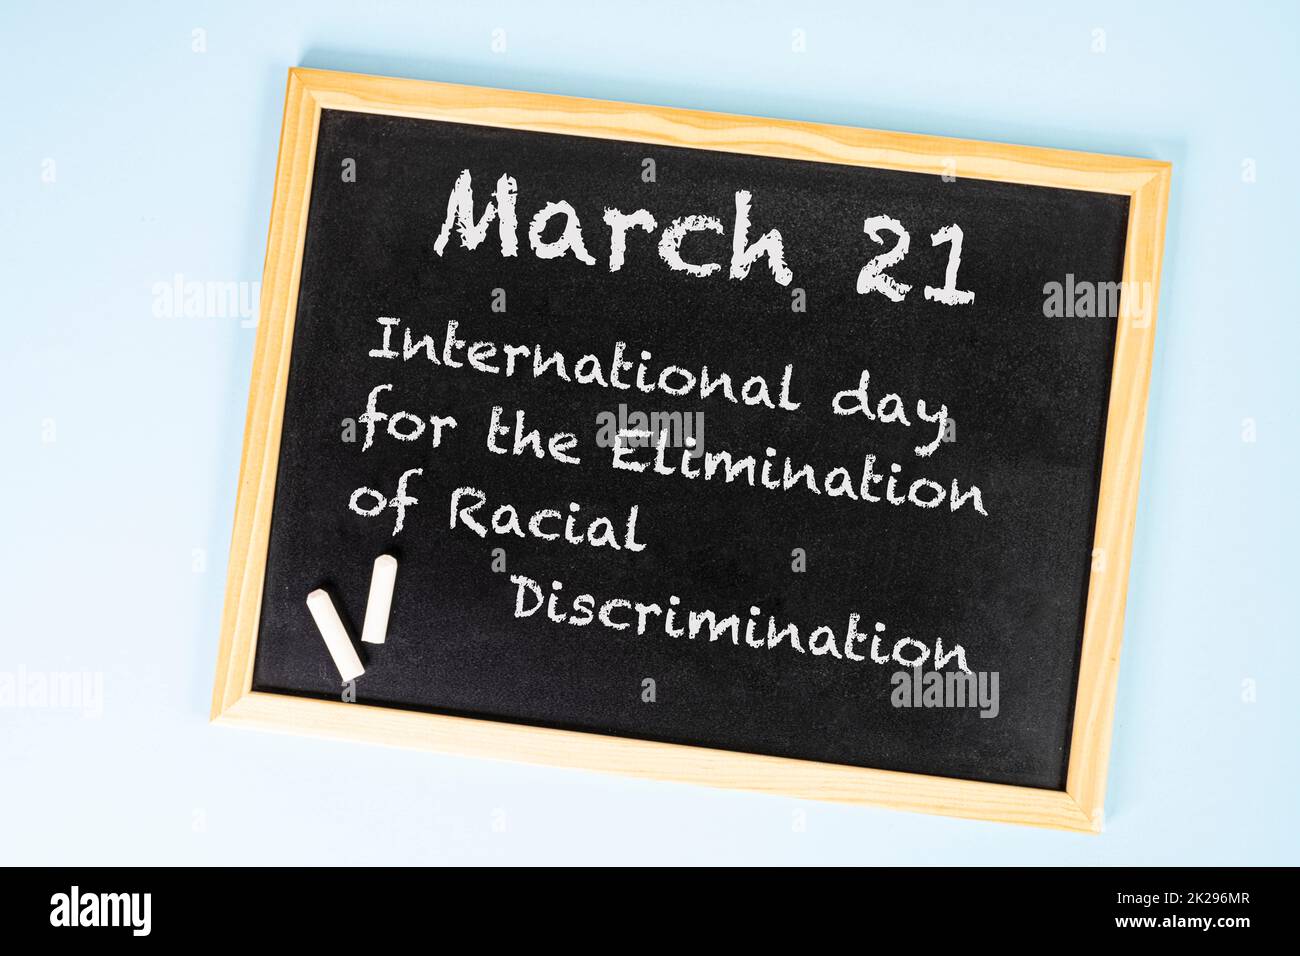 International Day for the Elimination of Racial Discriminations Stock Photo